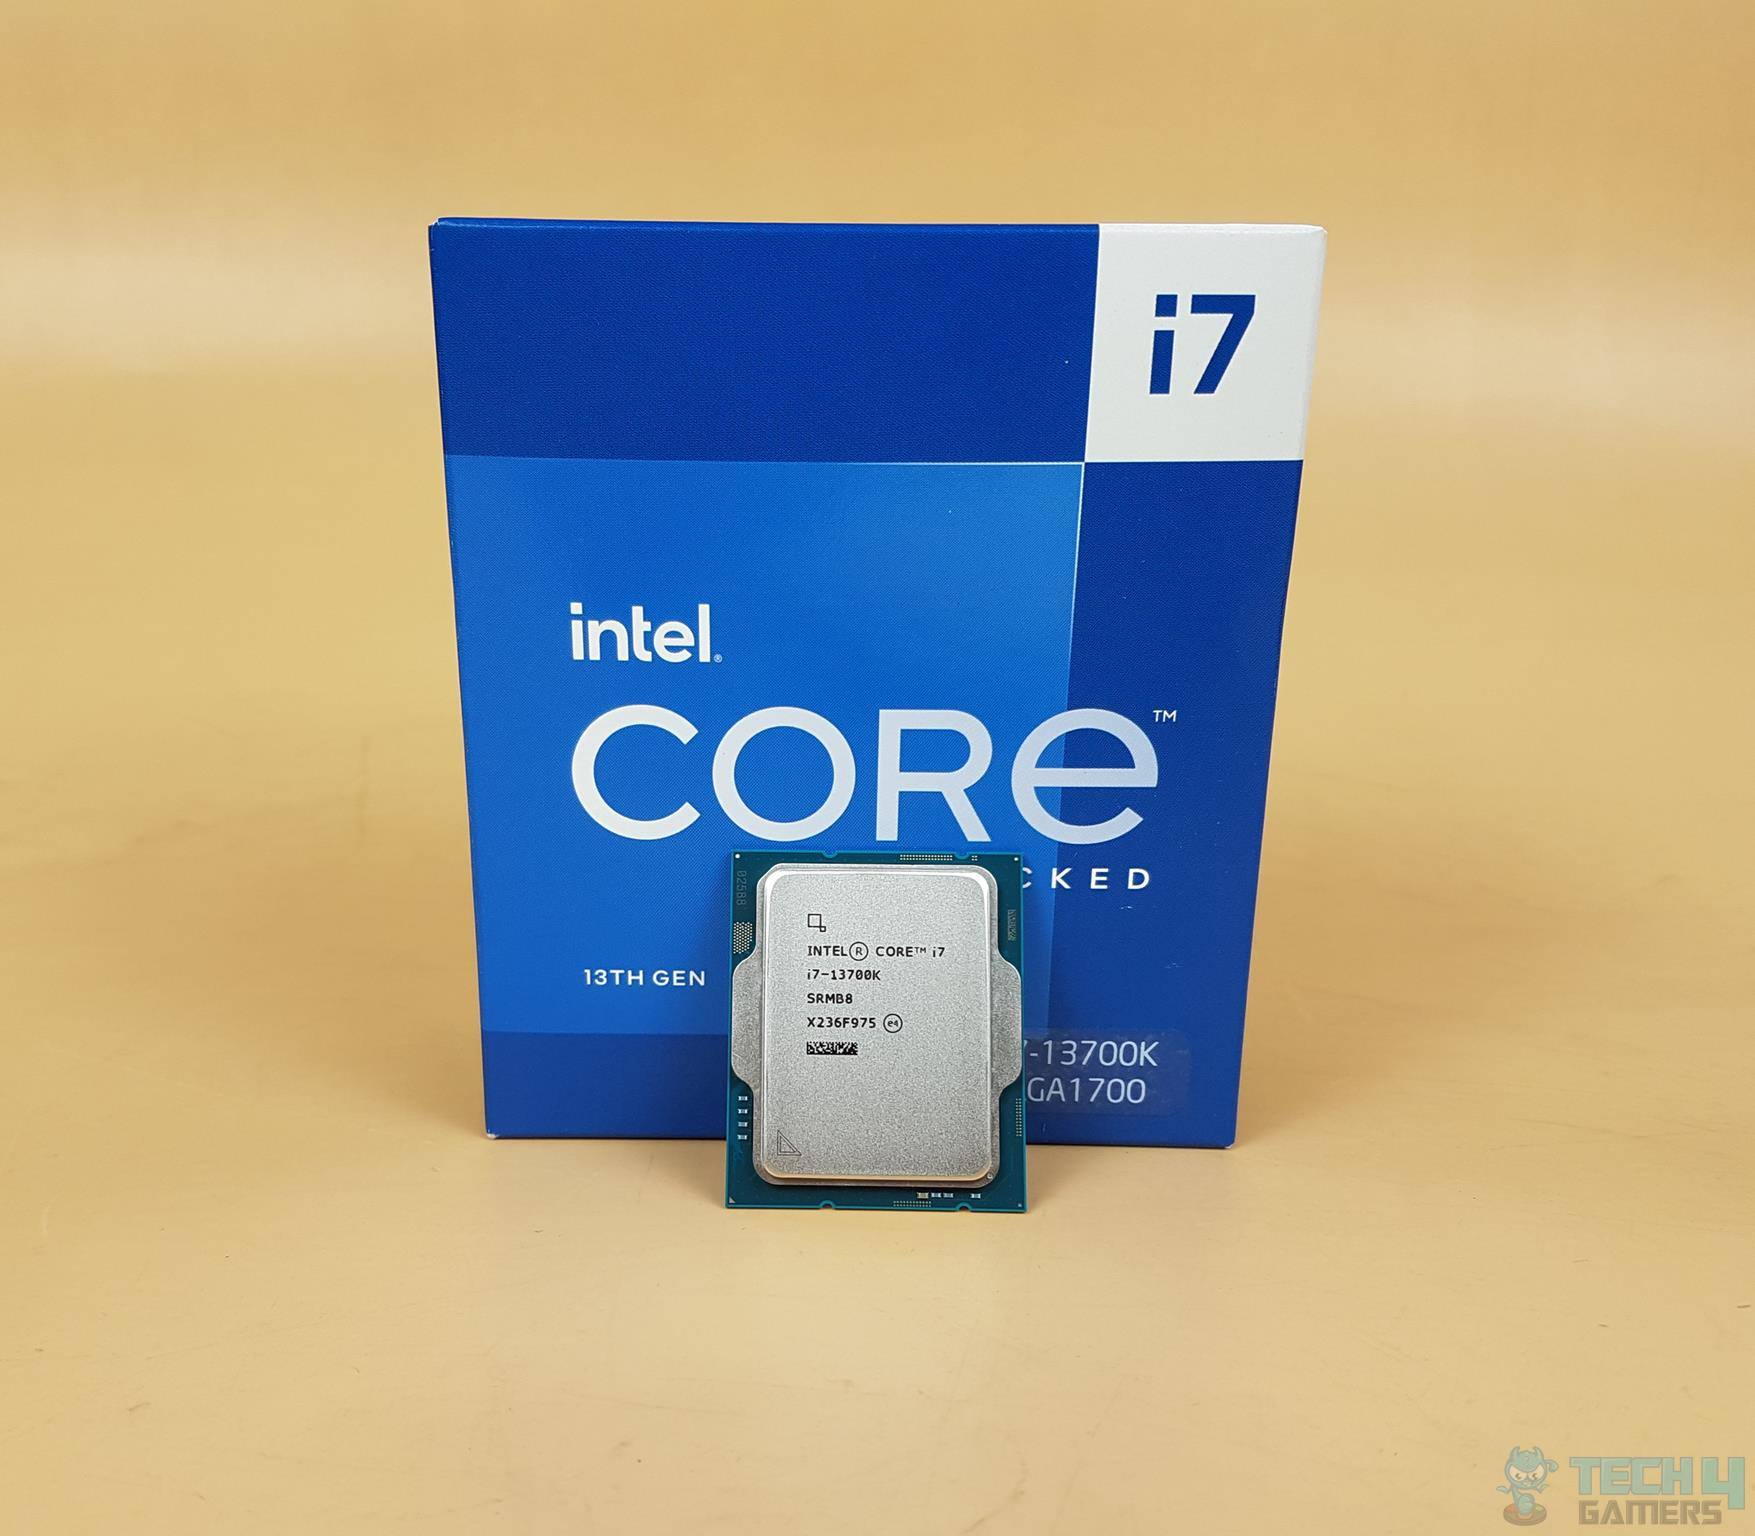 Intel Core i7 13700k Review: Is It Worth It? - Tech4Gamers